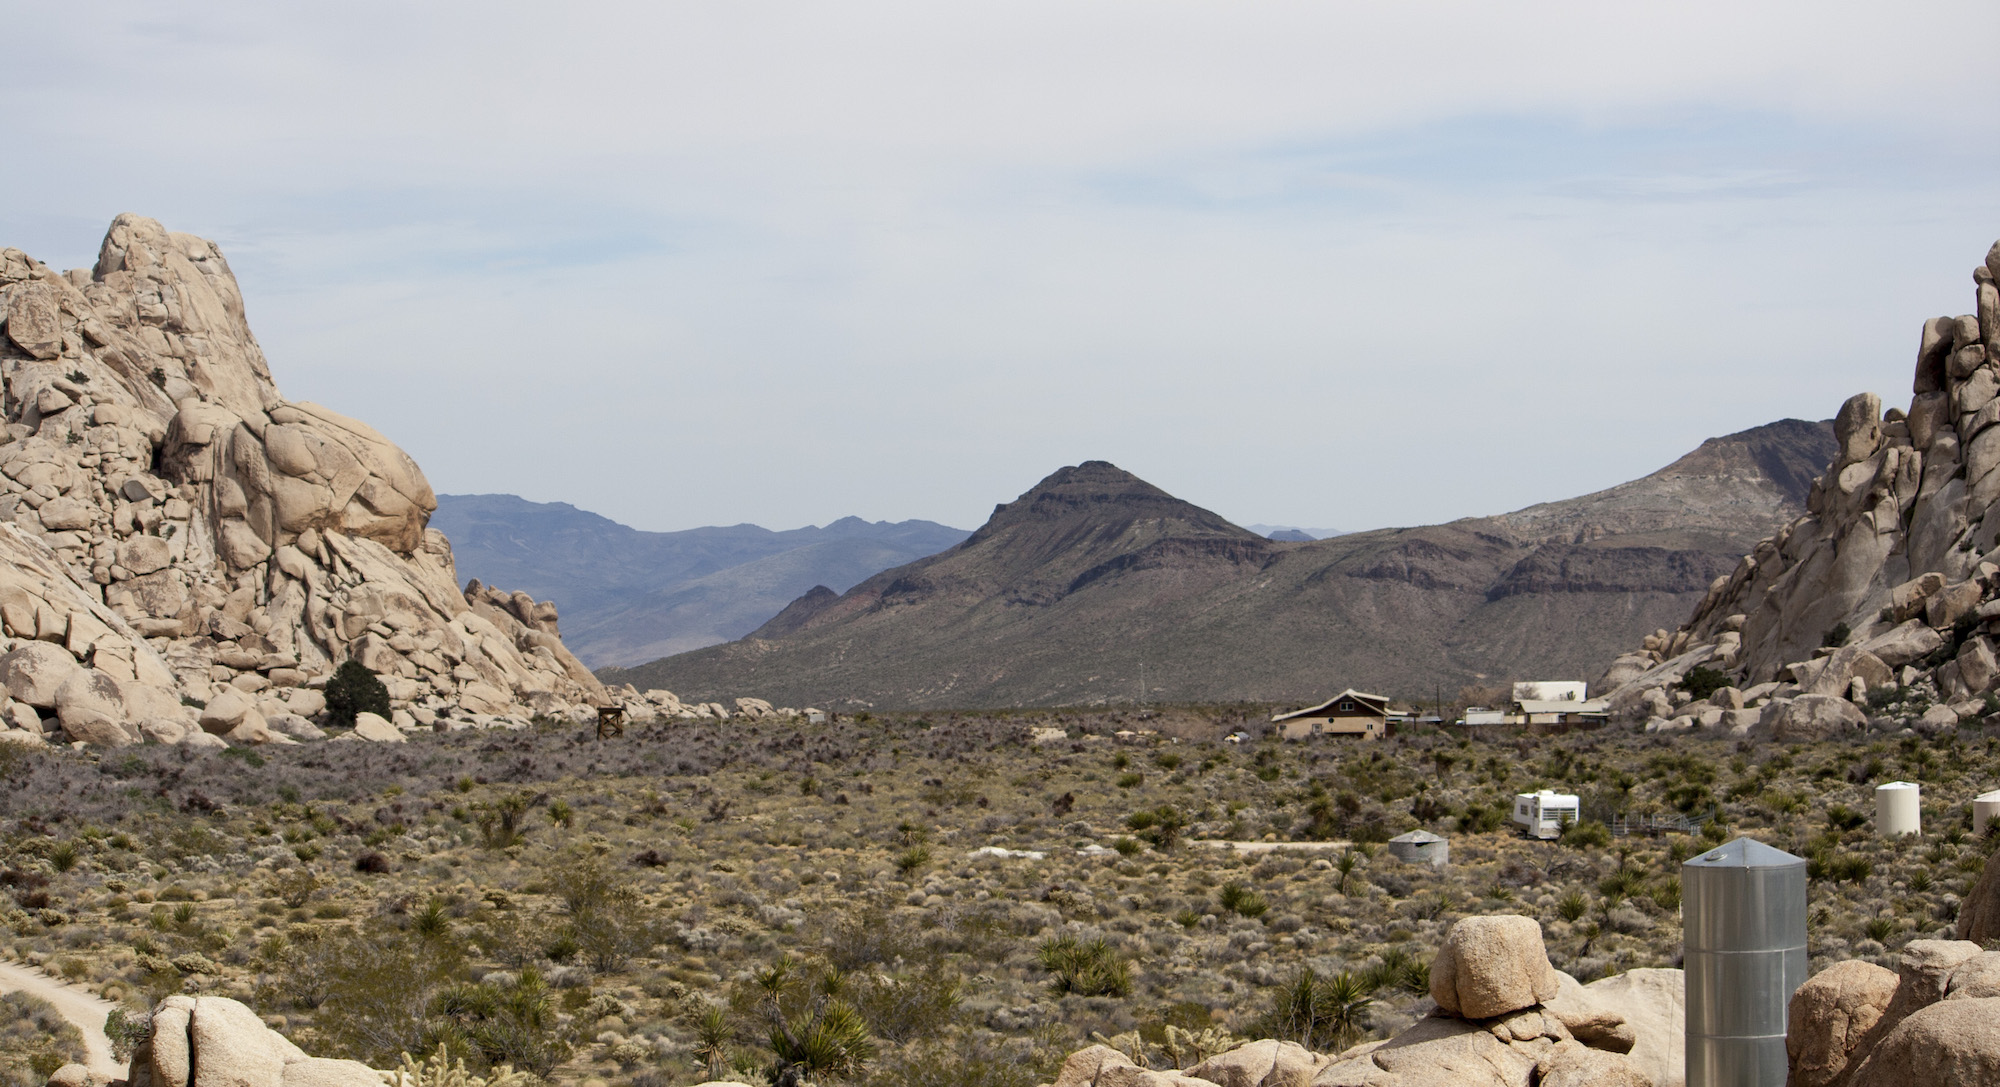 Sweeny Granite Mountain Desert Research Center, a University of California, Natural Reserve.